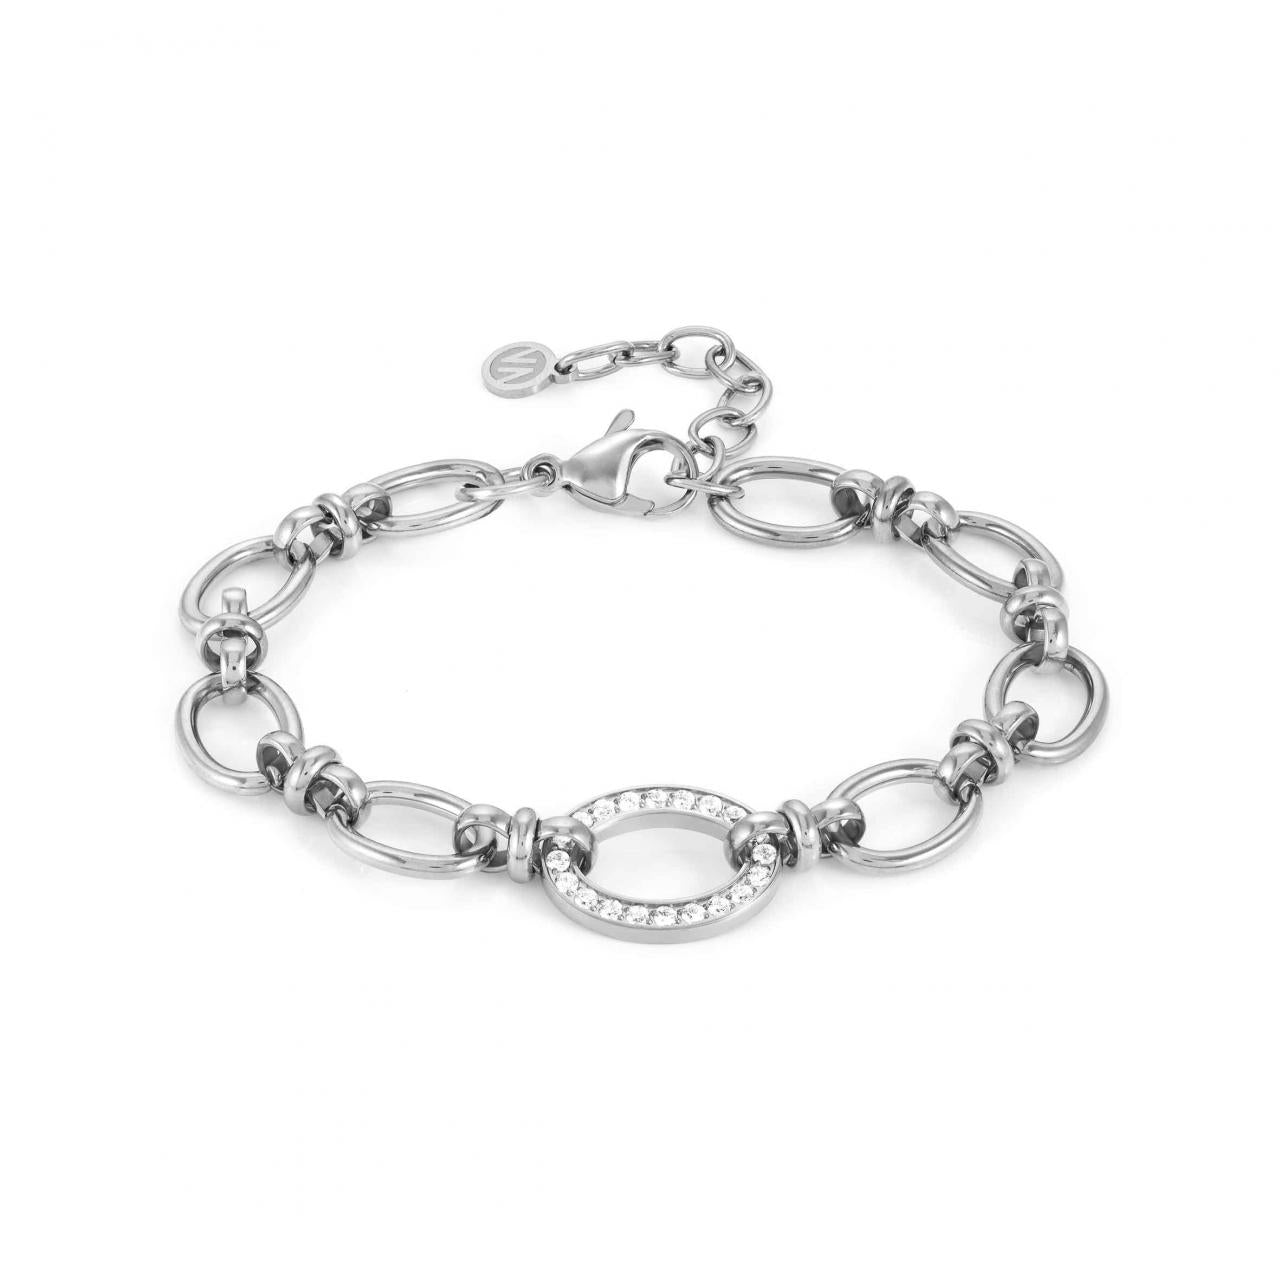 Affinity stainless steel chain bracelet